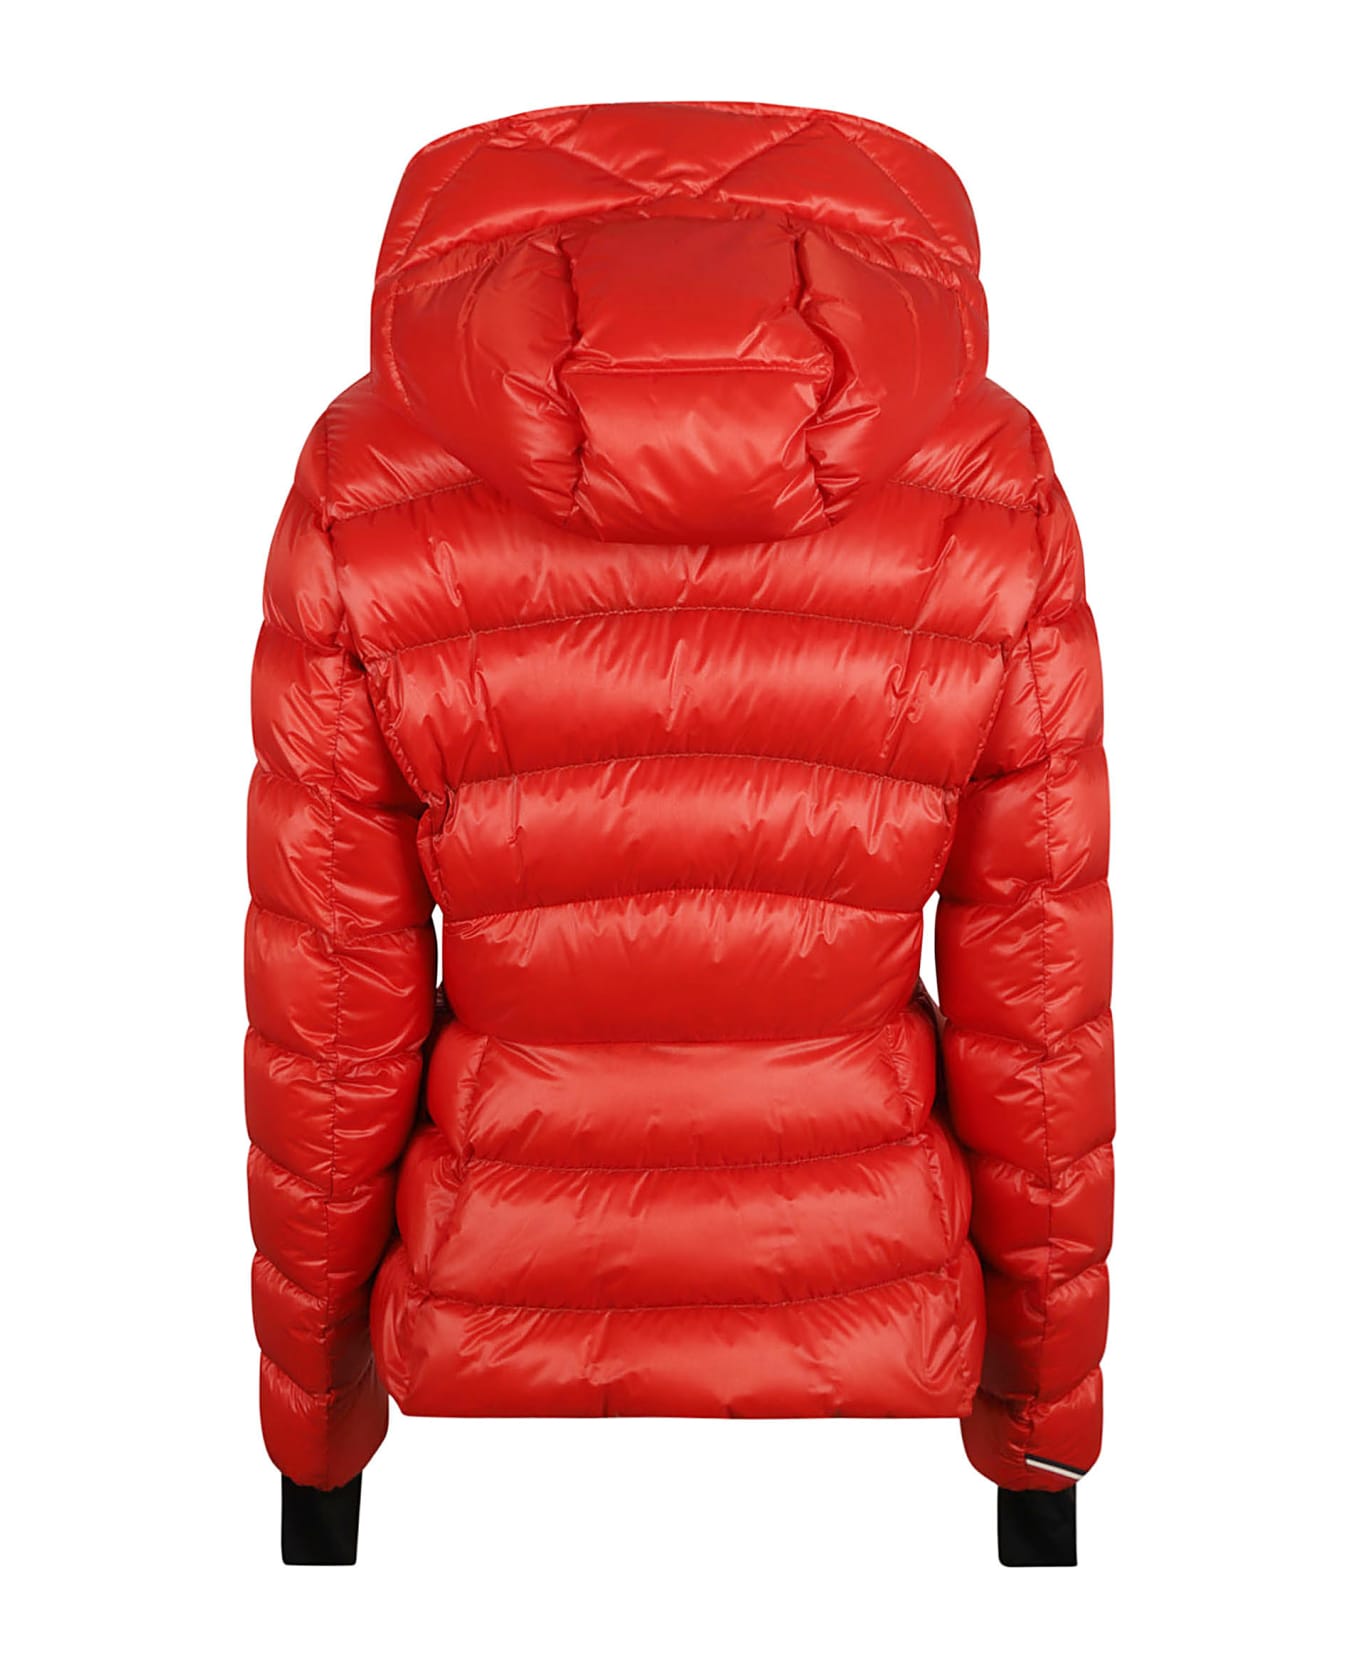 Moncler Grenoble Armoniques Padded Jacket - Red ダウンジャケット